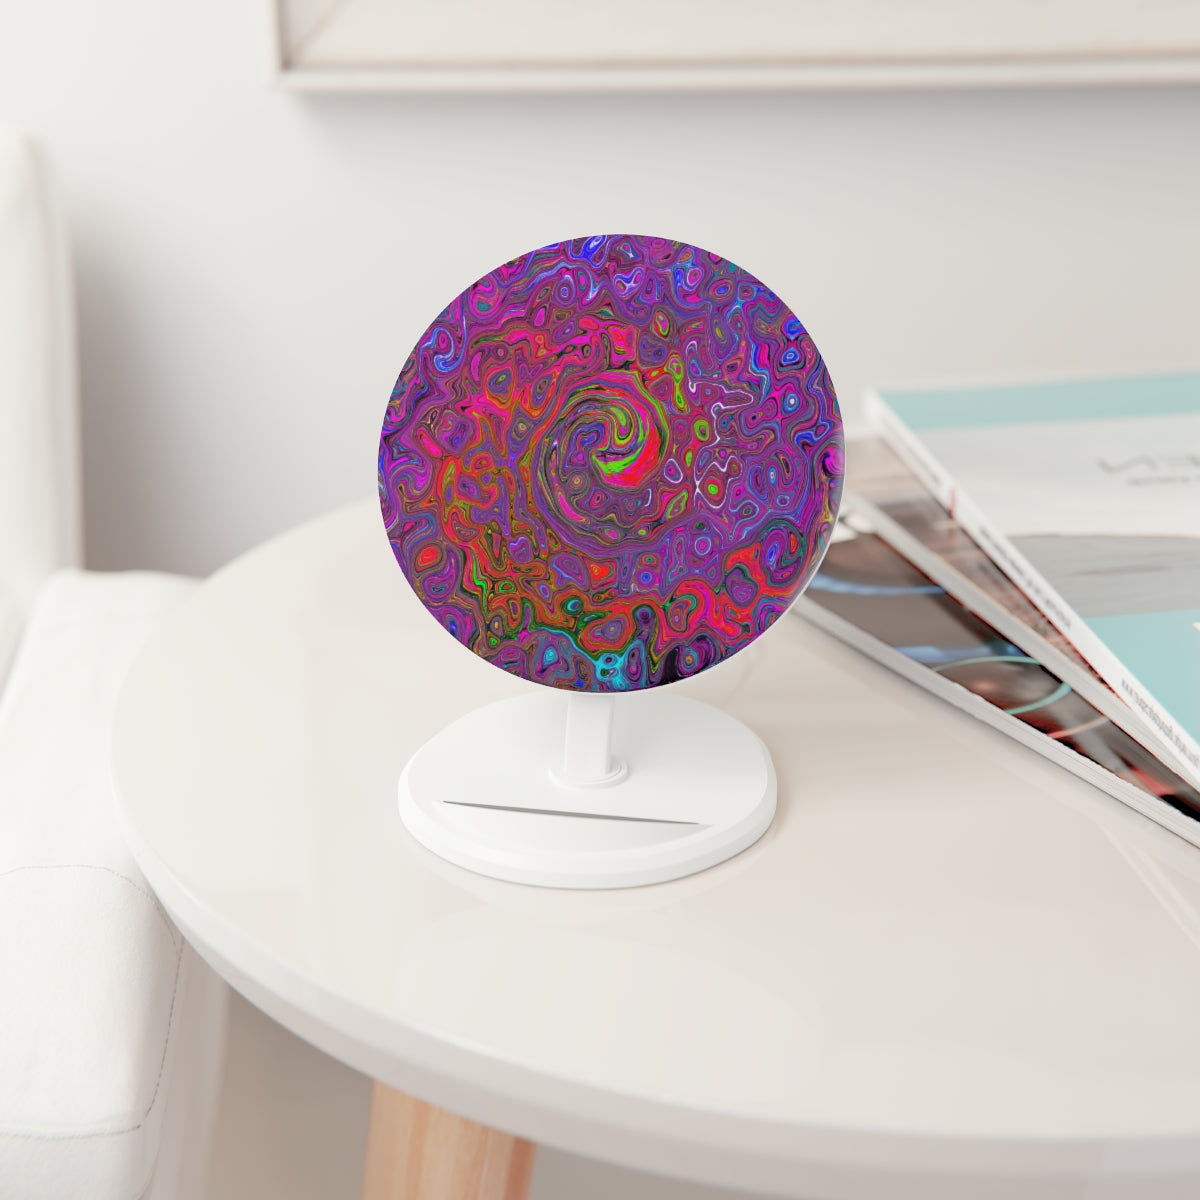 Induction Charger, Psychedelic Groovy Magenta Retro Liquid Swirl